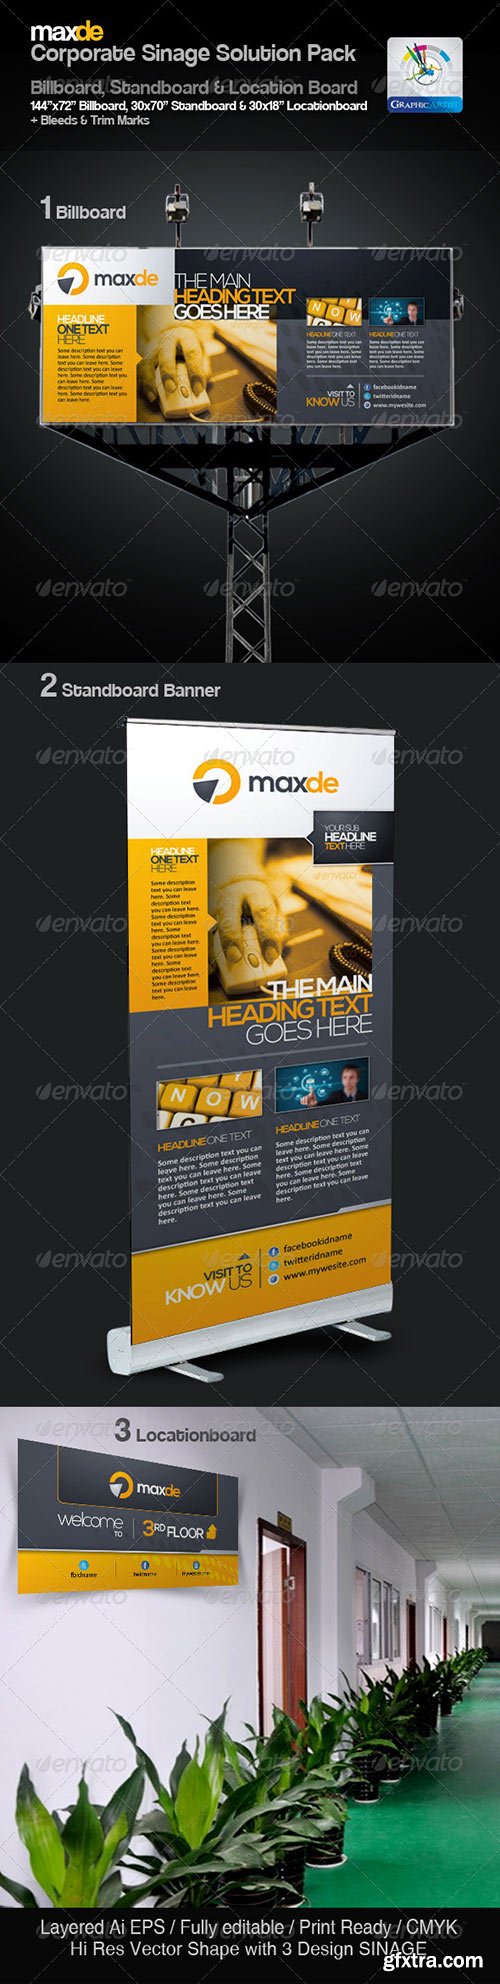 Graphicriver - Maxde Clean Sinage Solution Pack 3072853